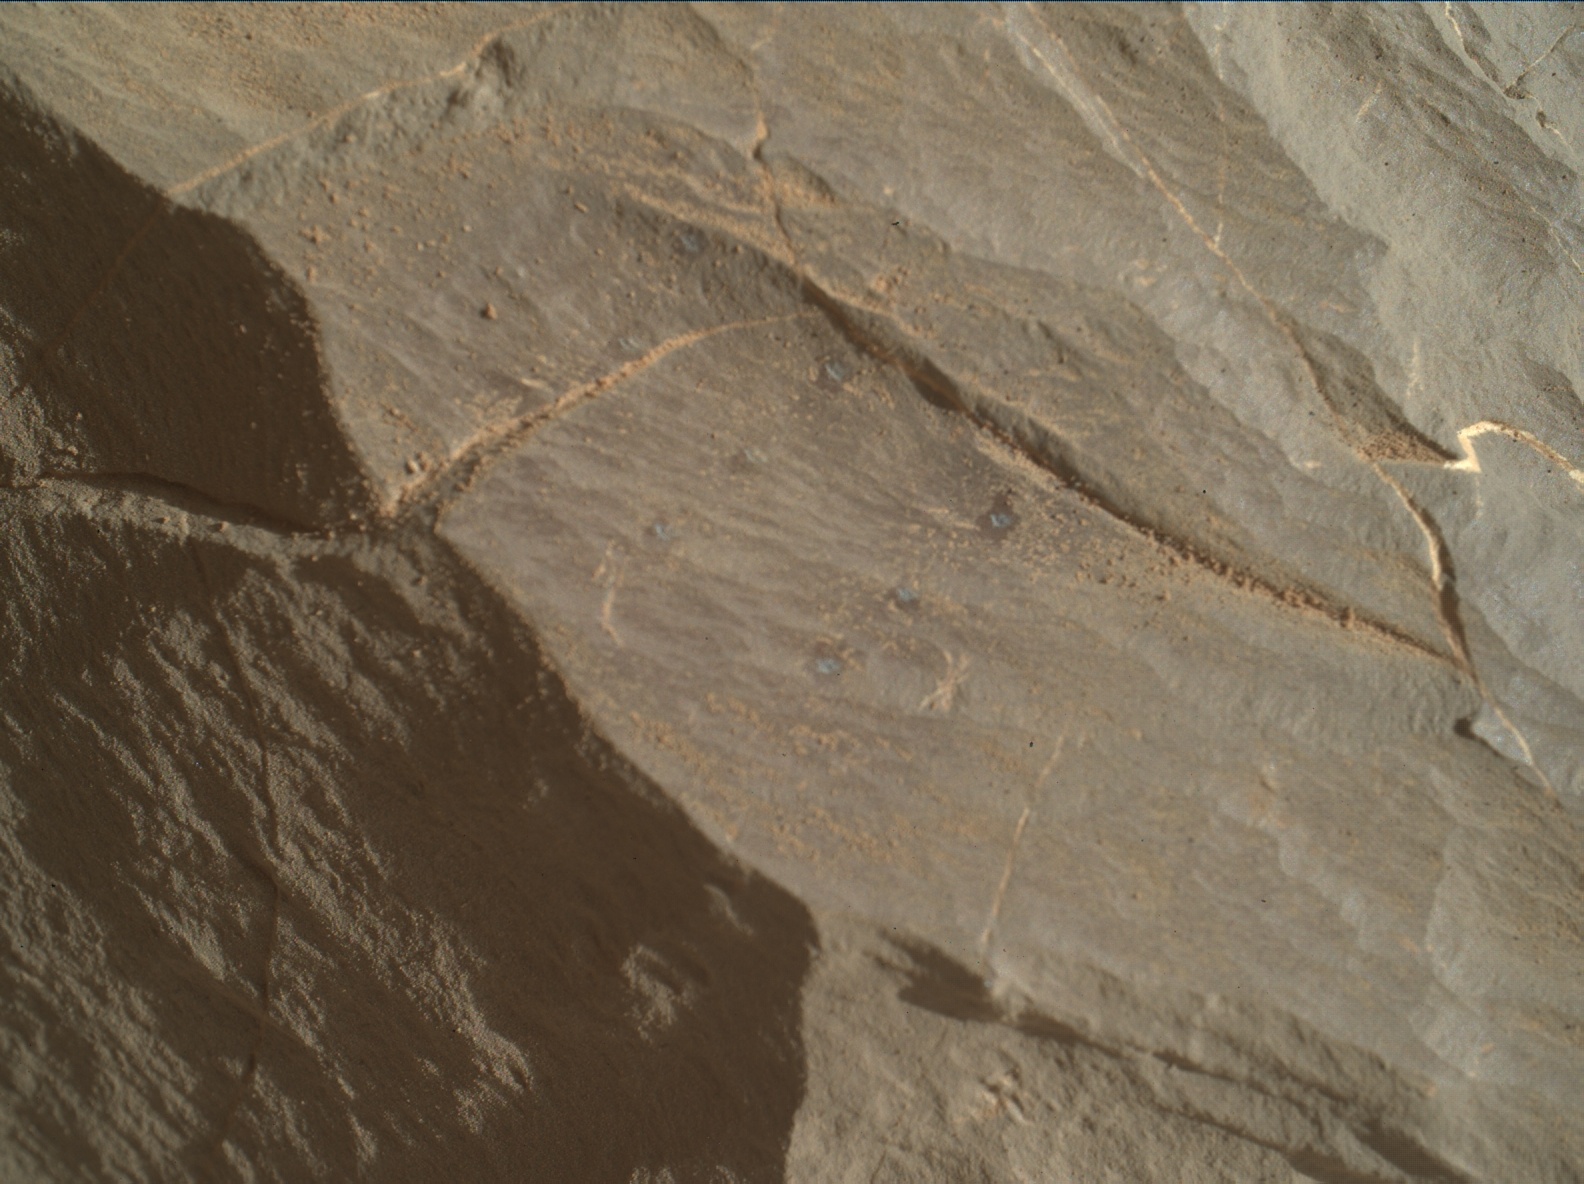 Nasa's Mars rover Curiosity acquired this image using its Mars Hand Lens Imager (MAHLI) on Sol 1996